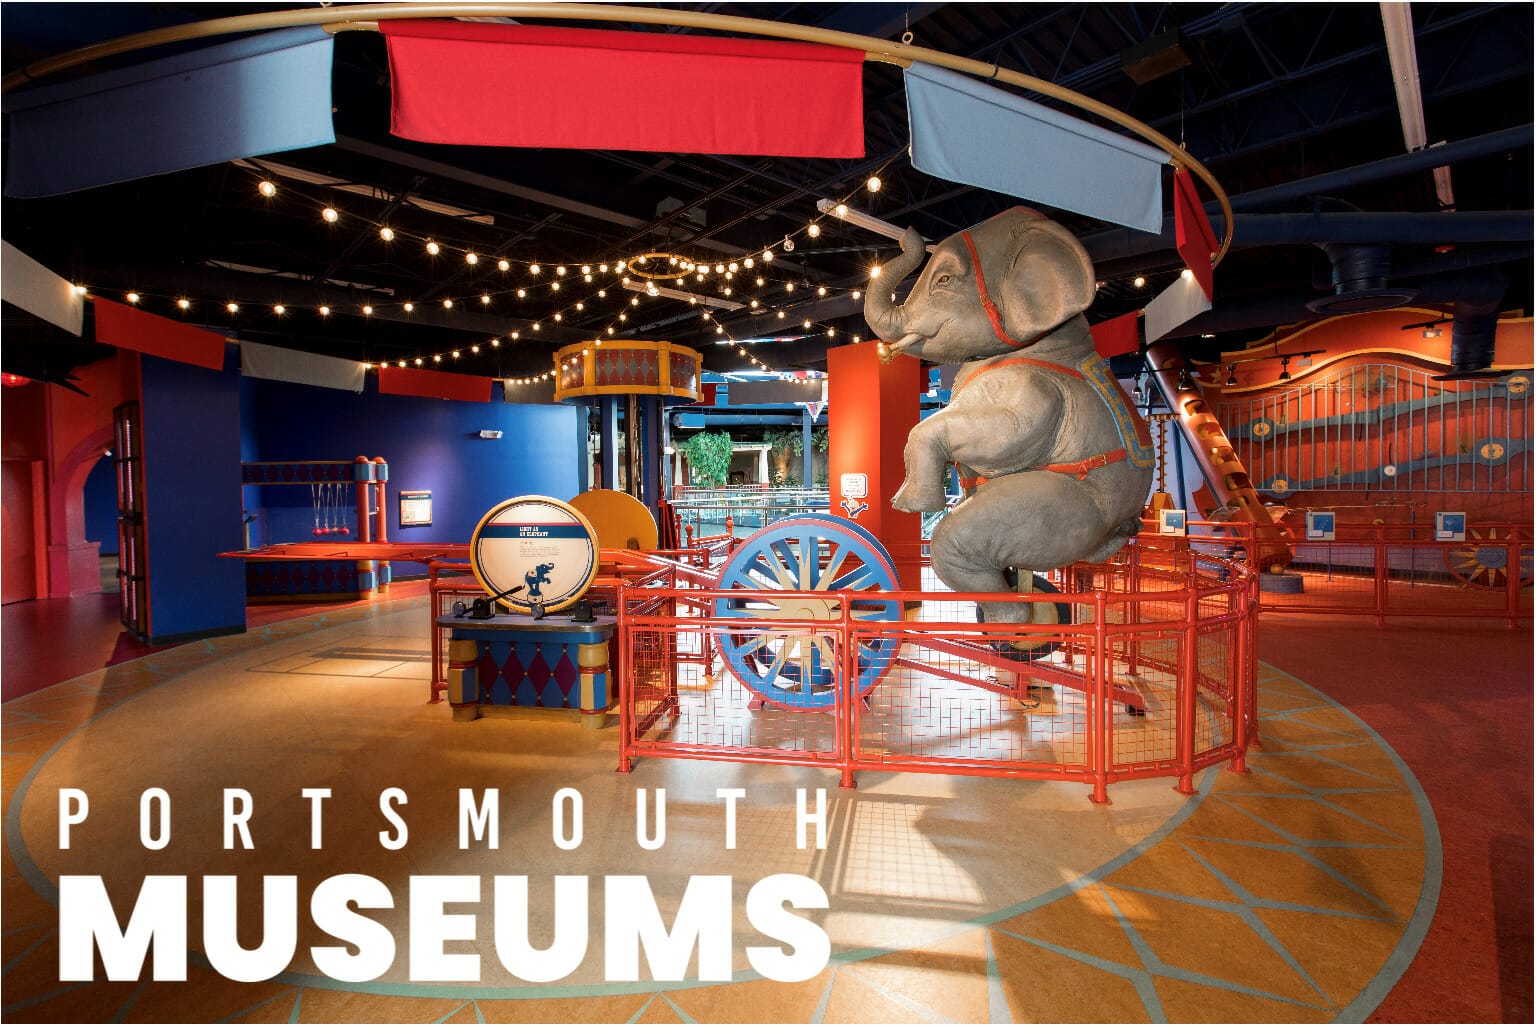 Elephant in physics exhibit with Portsmouth Museums logo